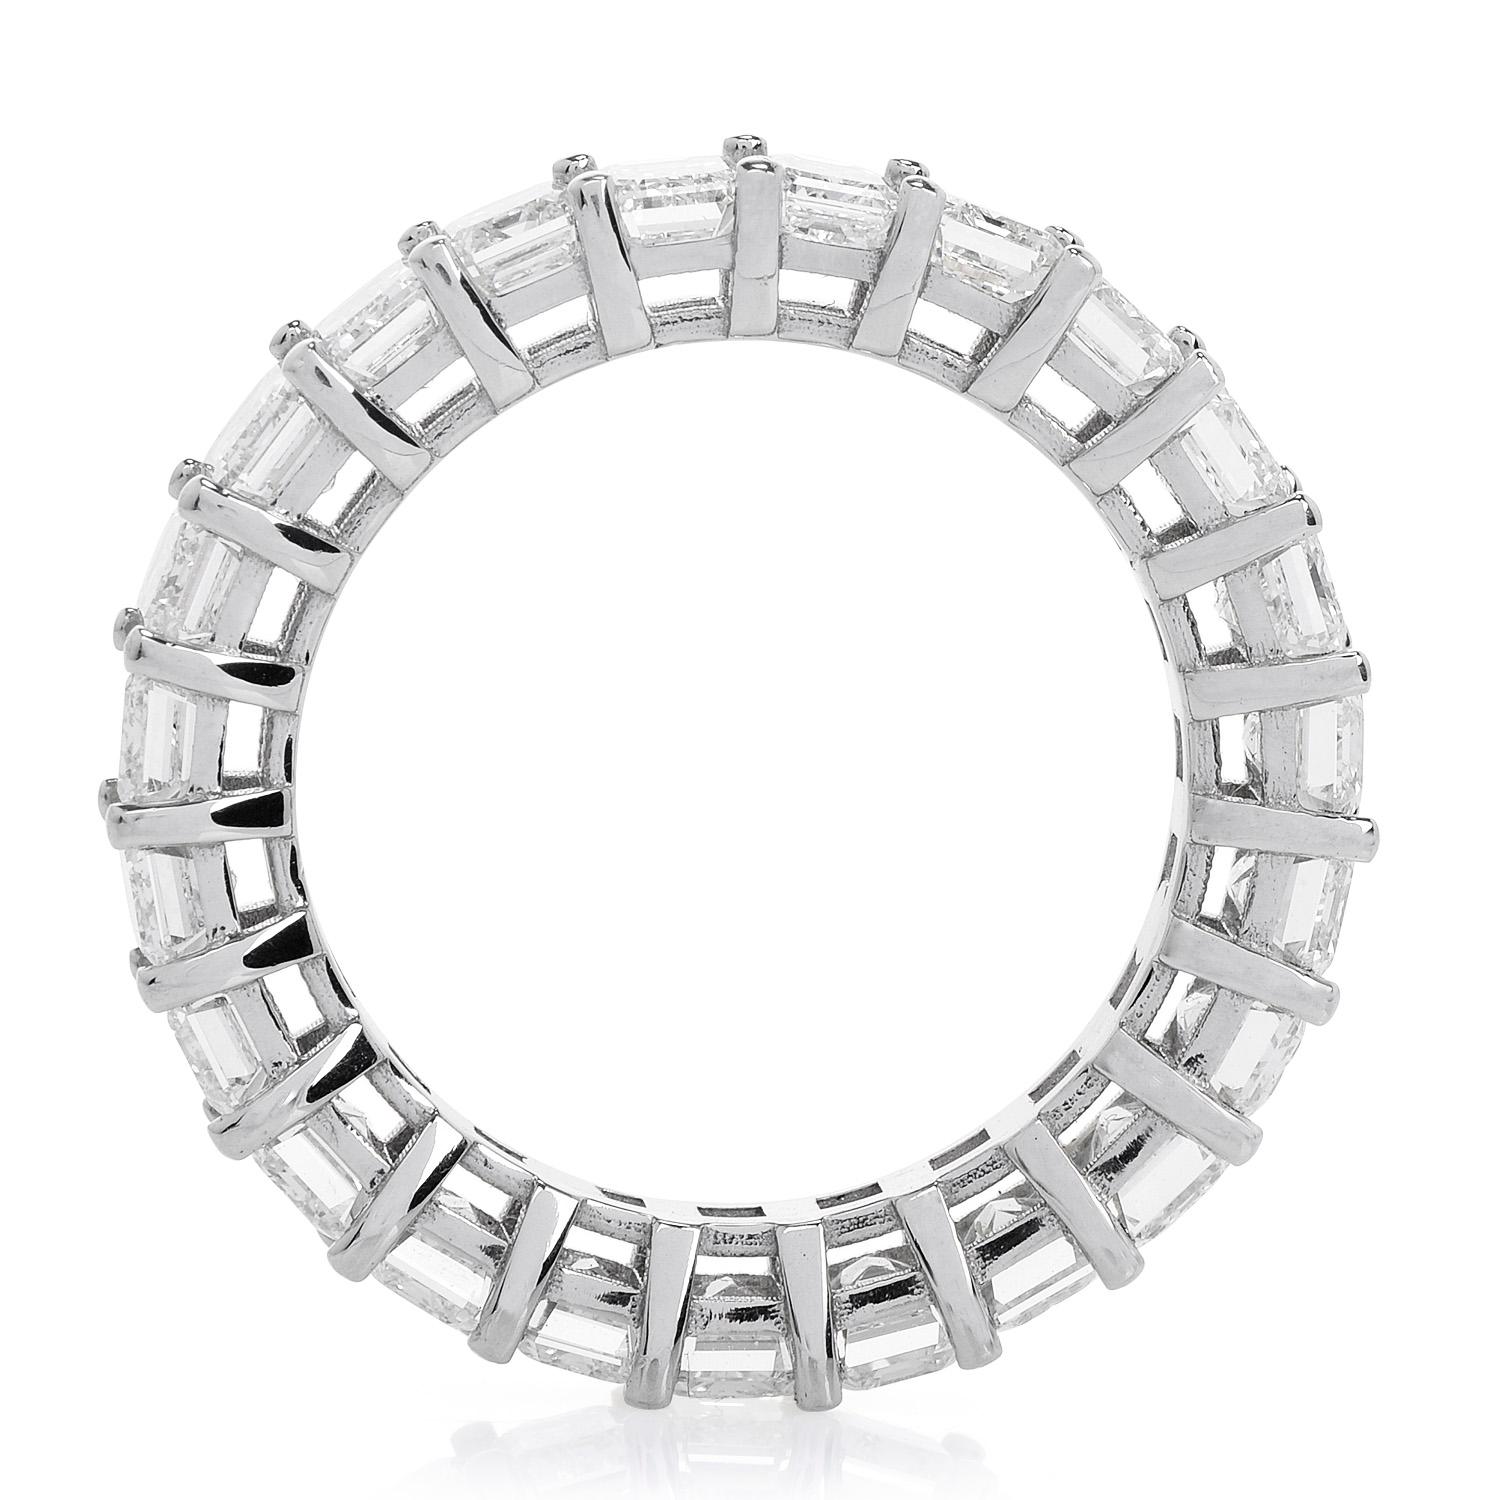 Women's or Men's 5.51 carats Emerald Cut Diamond Platinum Eternity Band Ring For Sale